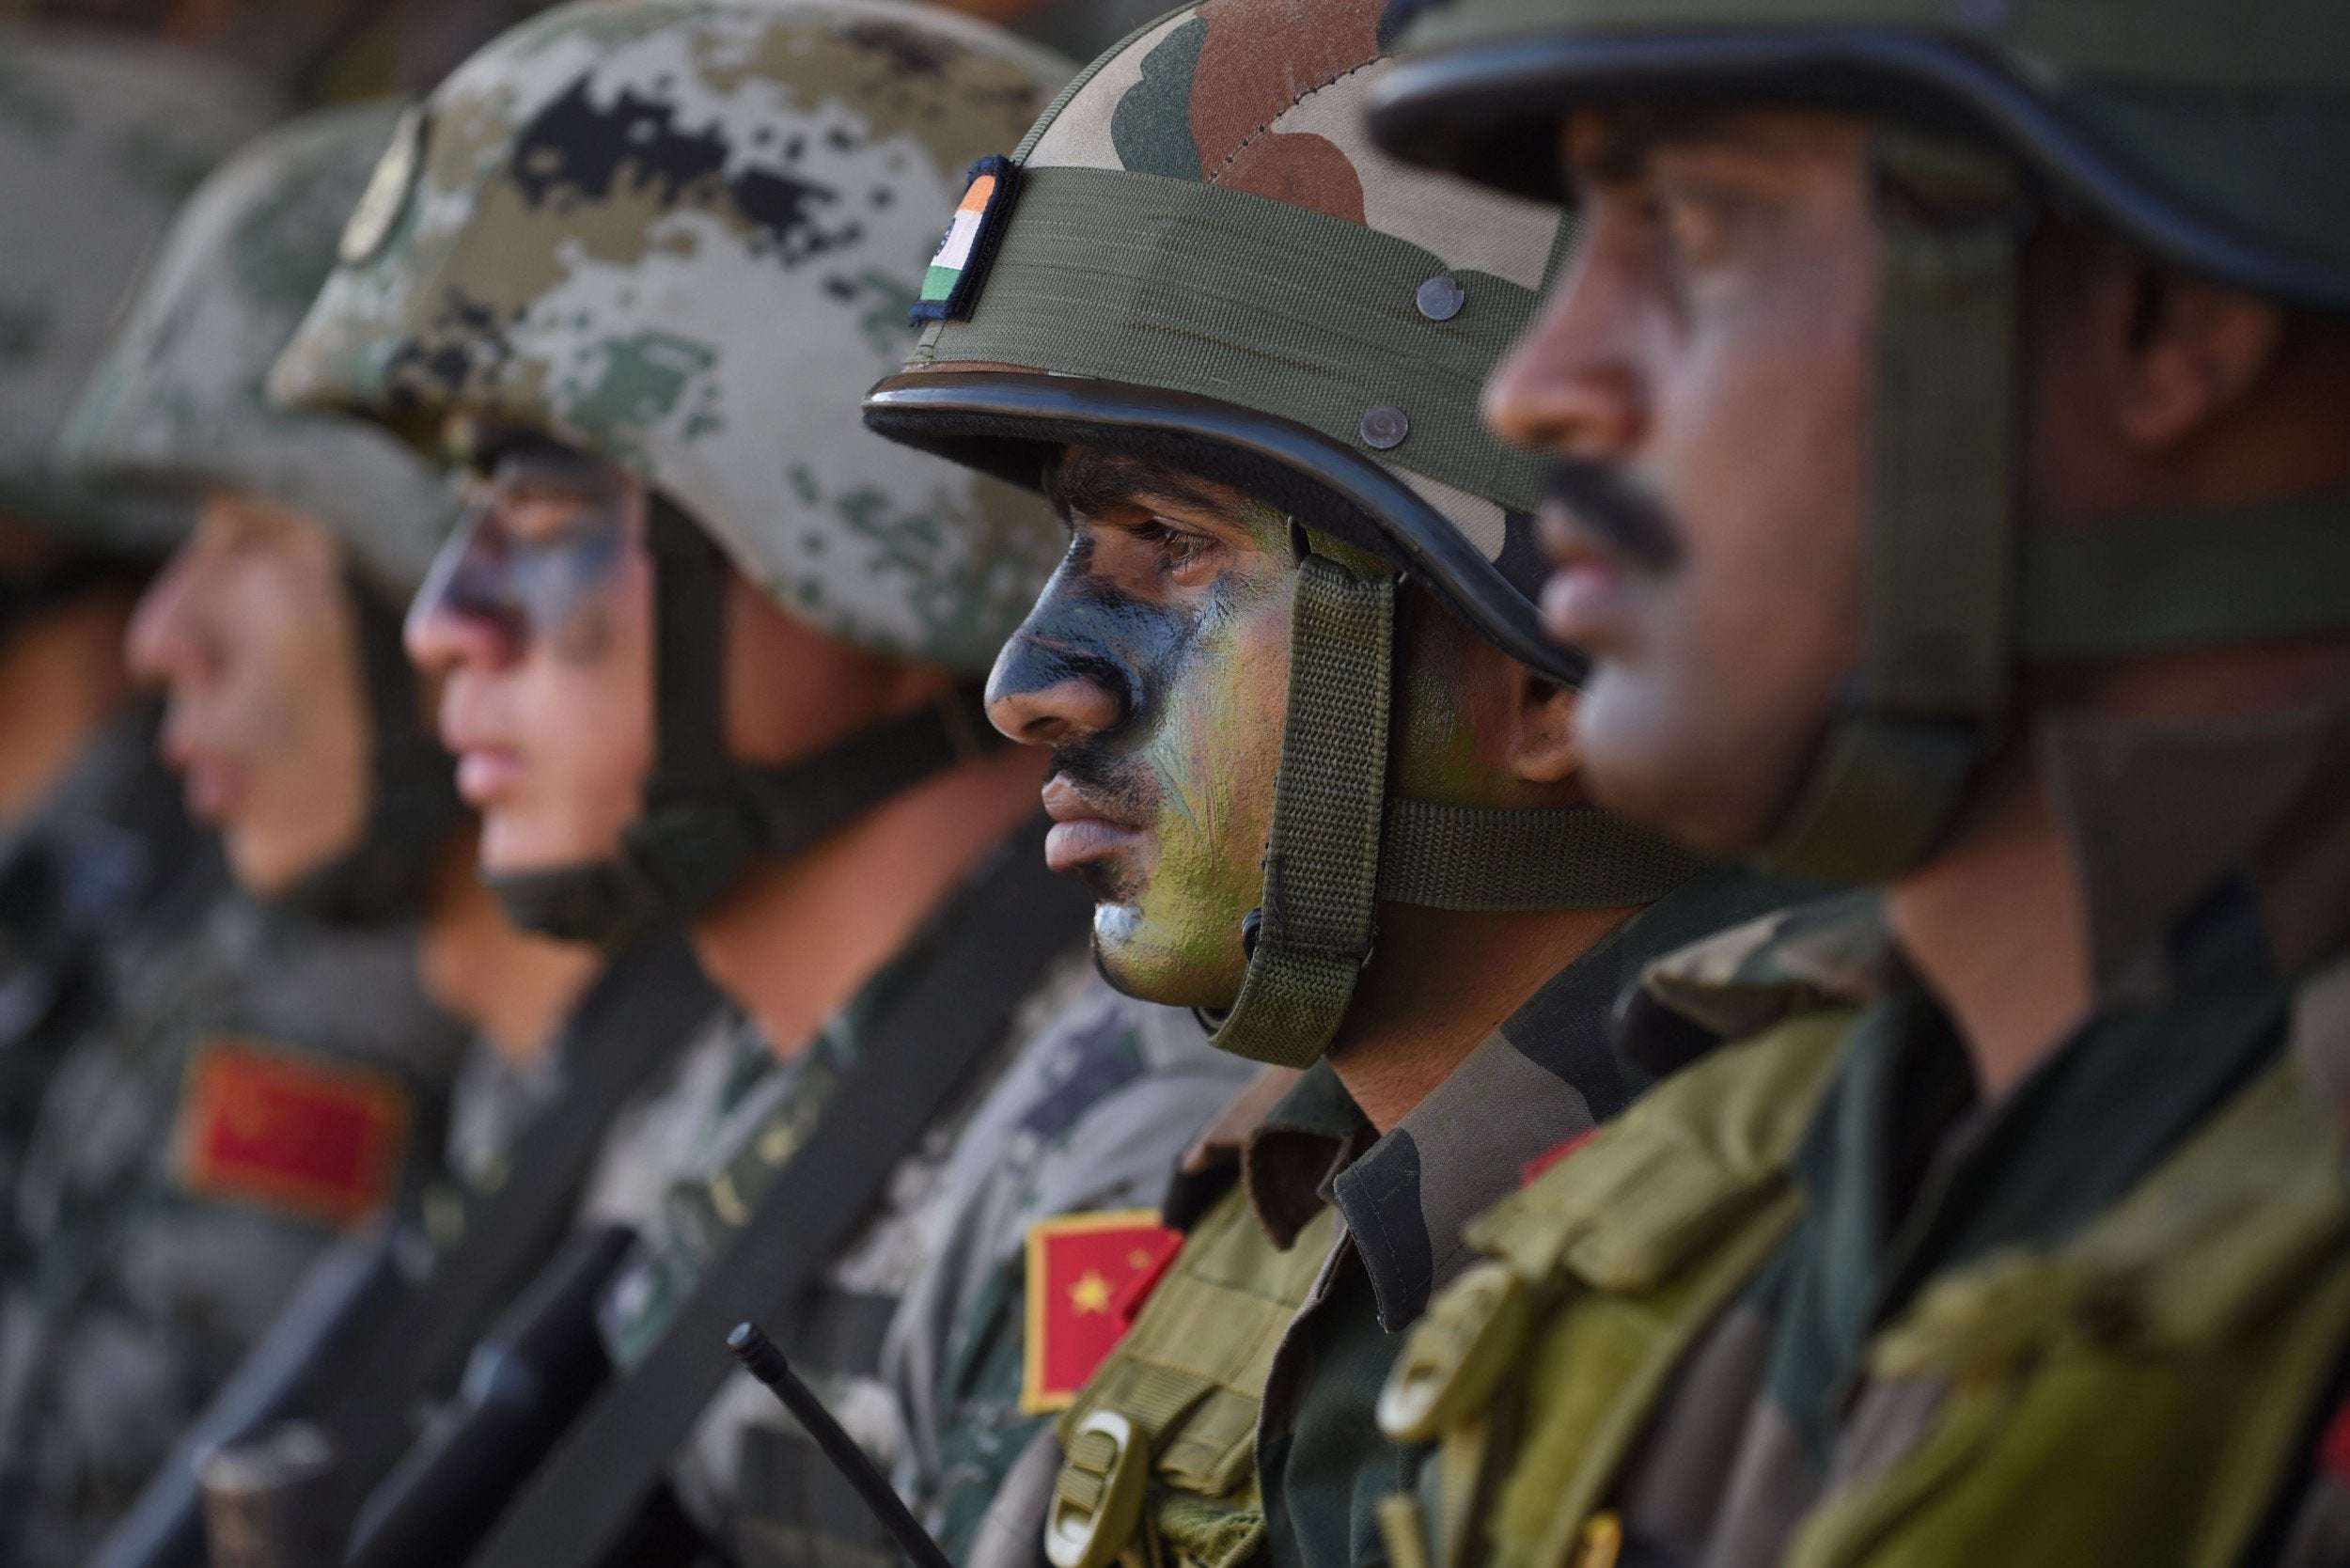 image for Chinese, Indian Troops Engage in 150-Strong Border Brawl With Fistfights and Stone Throwing, Delhi Says